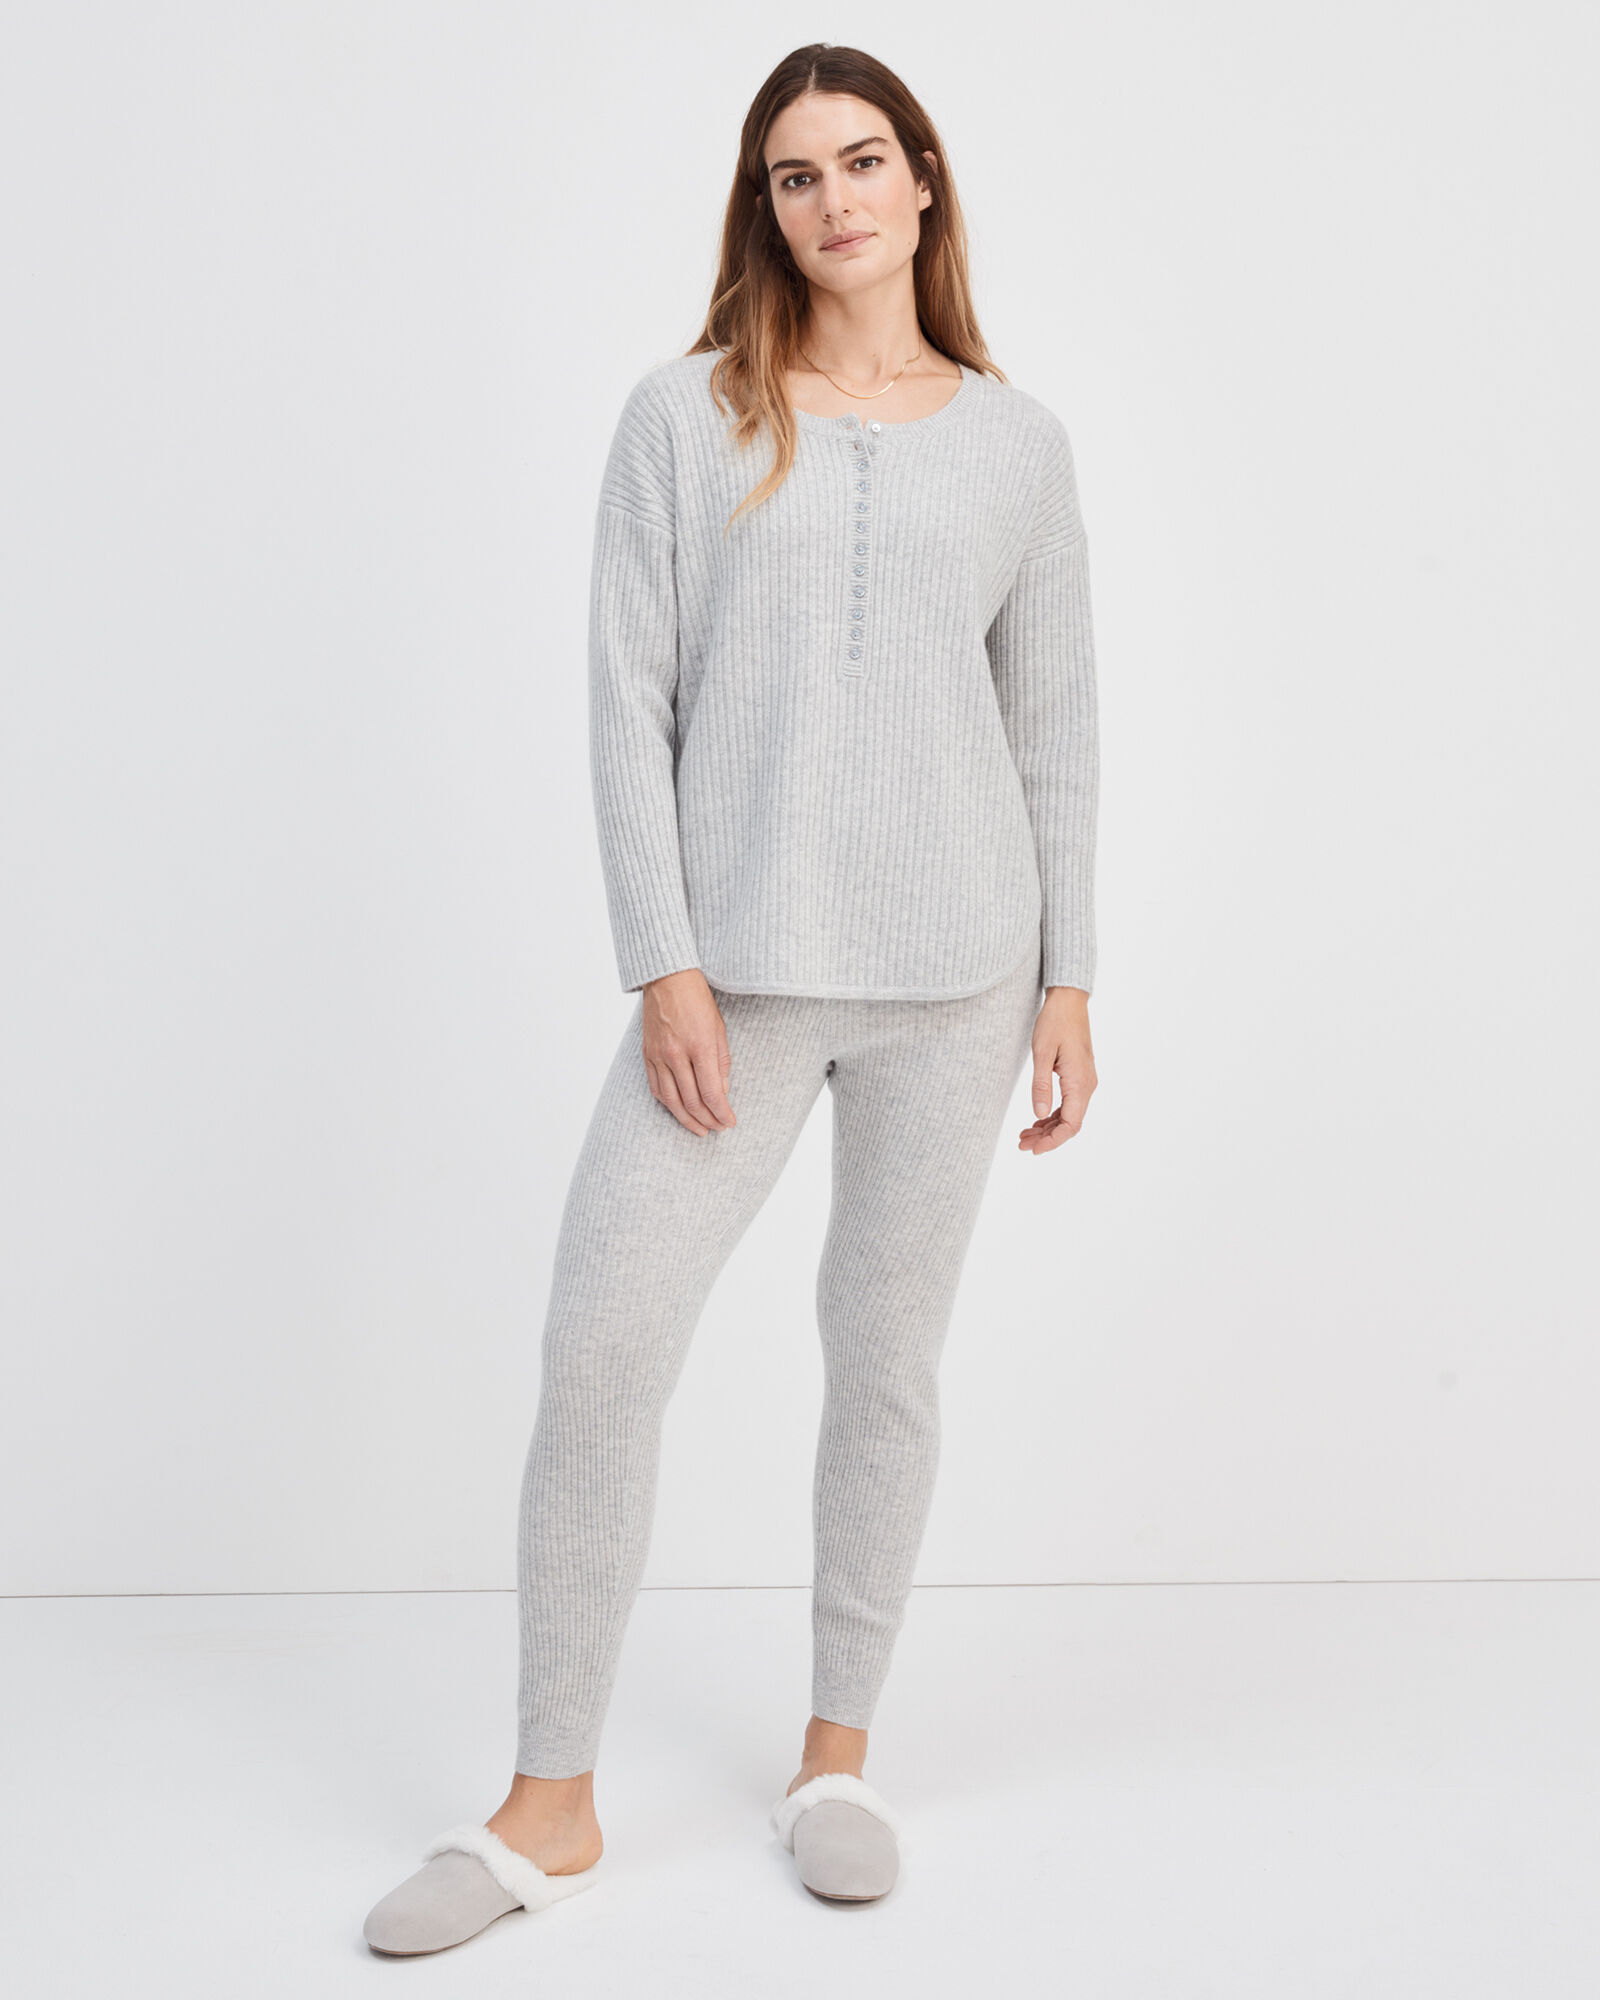 100% RIBBED CASHMERE KNIT LEGGINGS - Gray marl